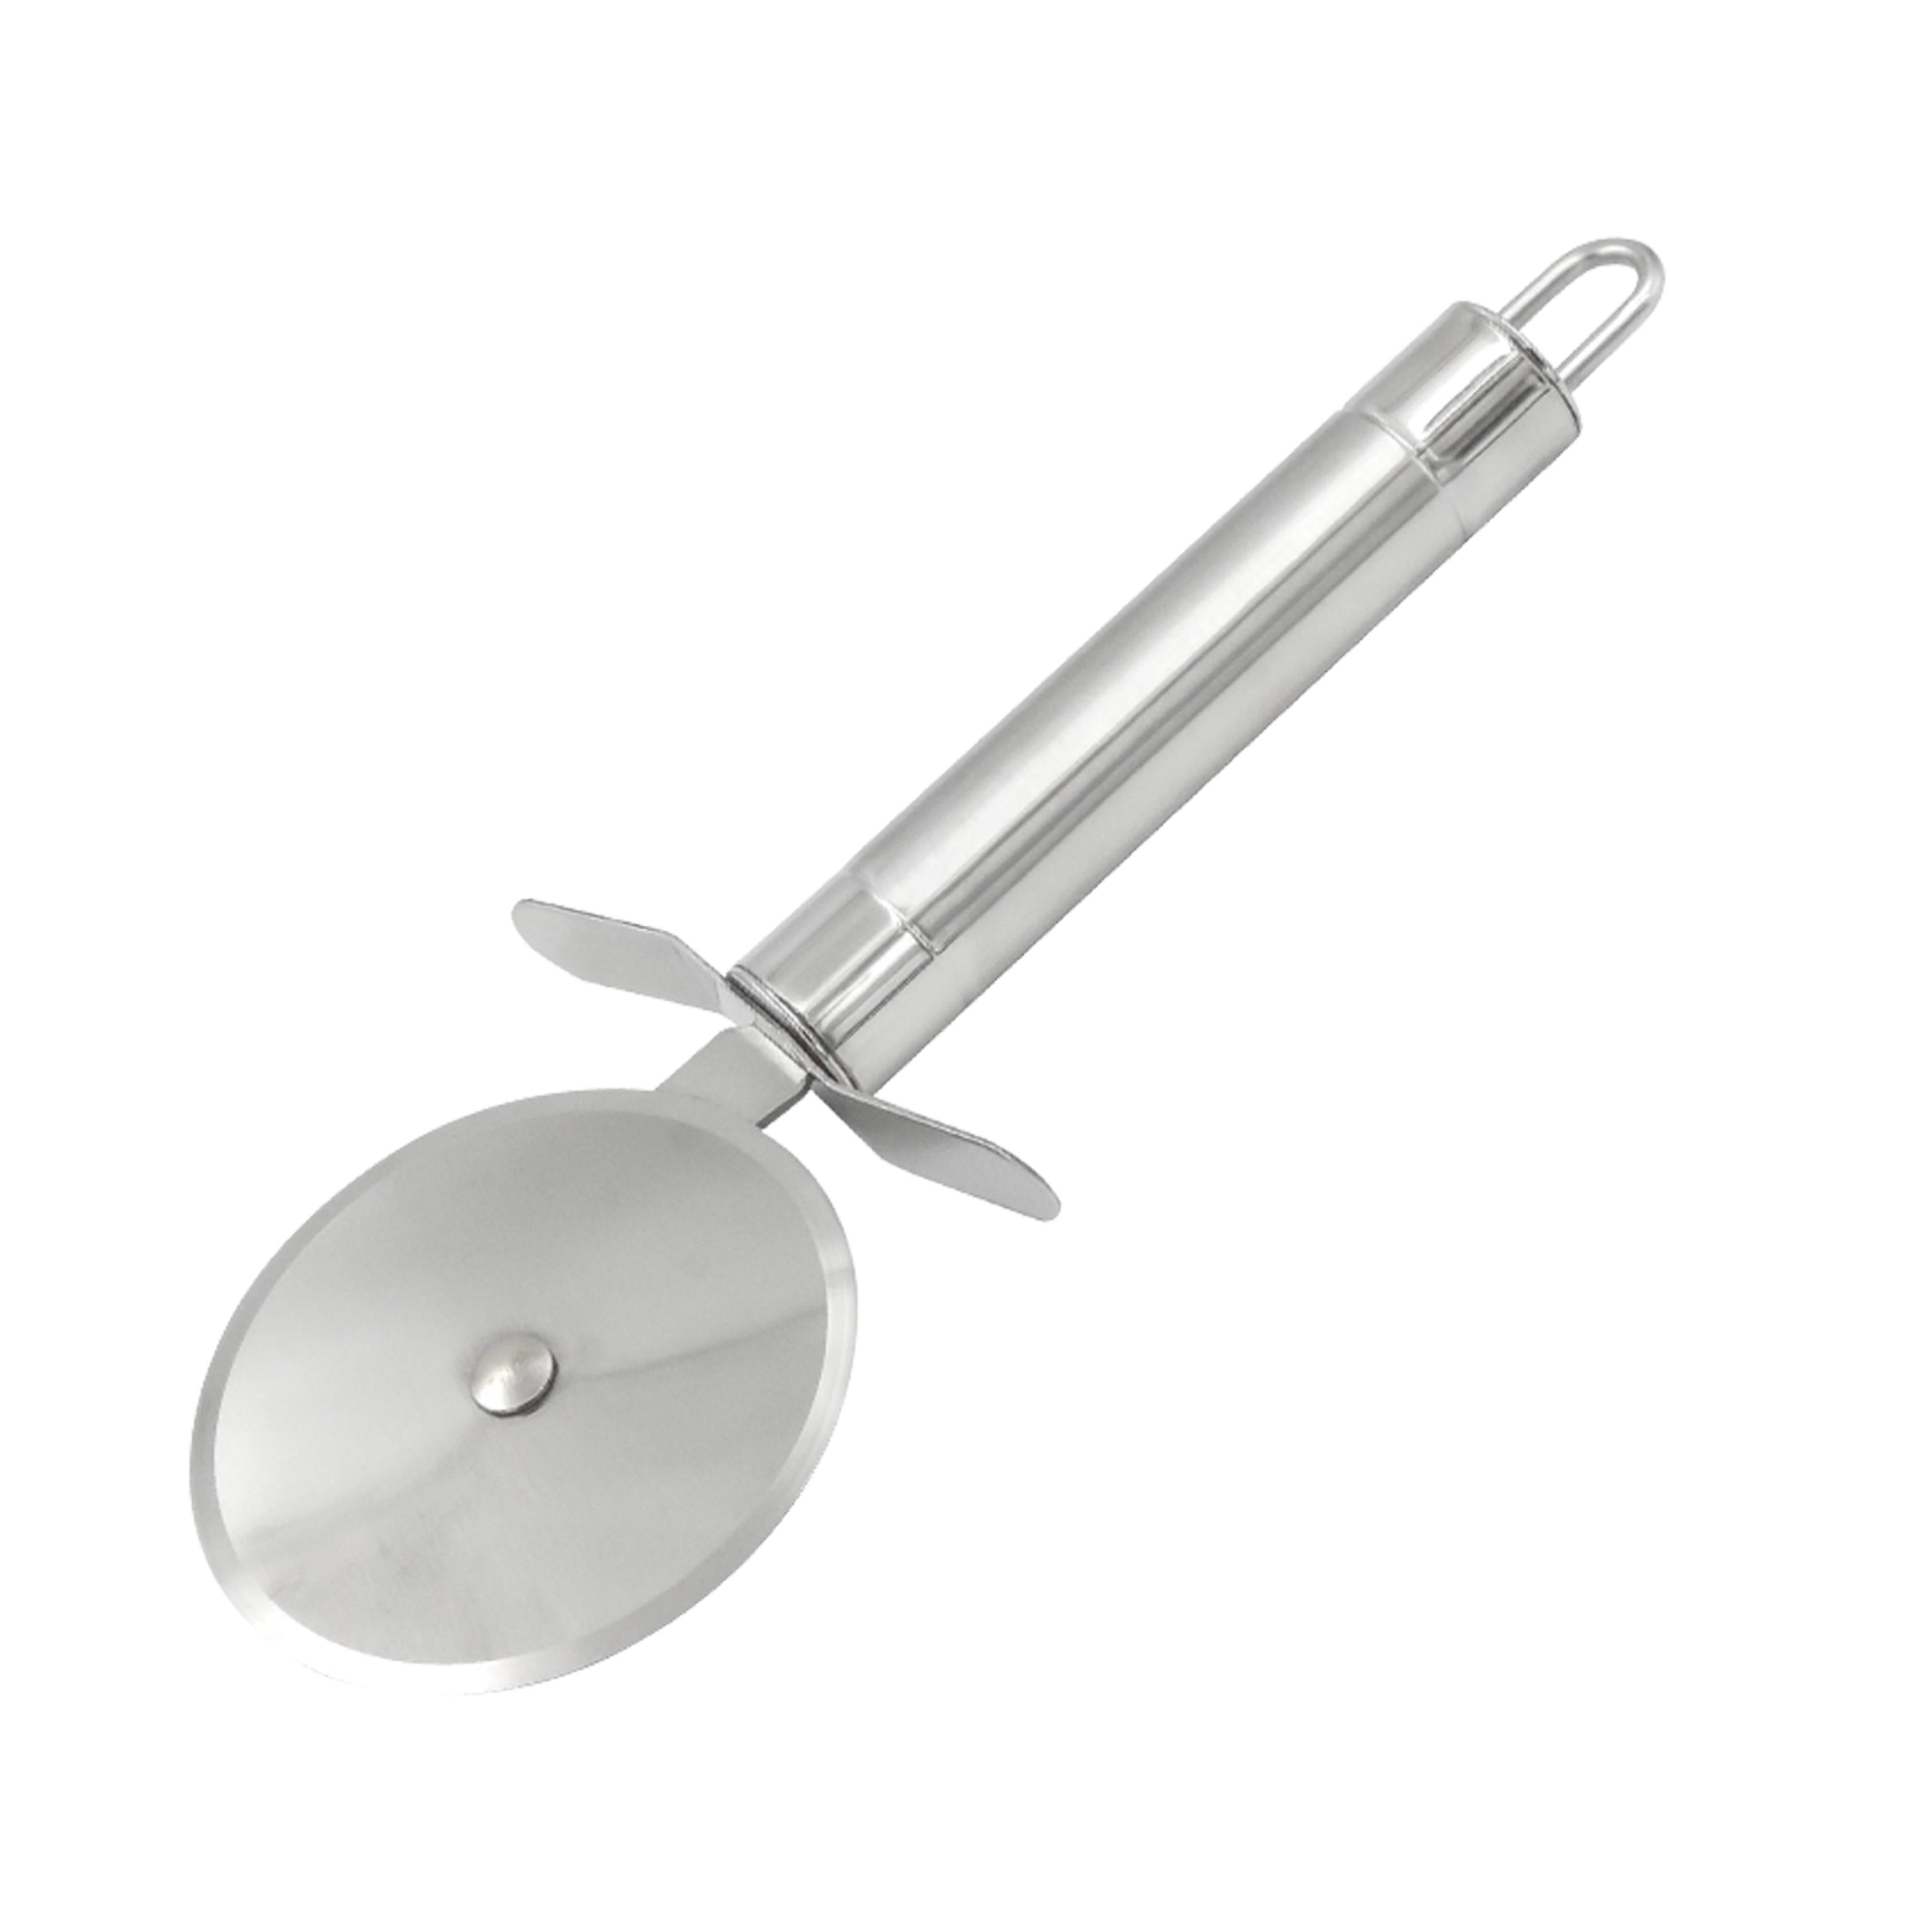 KOWS Dual tone  pizza cutter (PPC004)